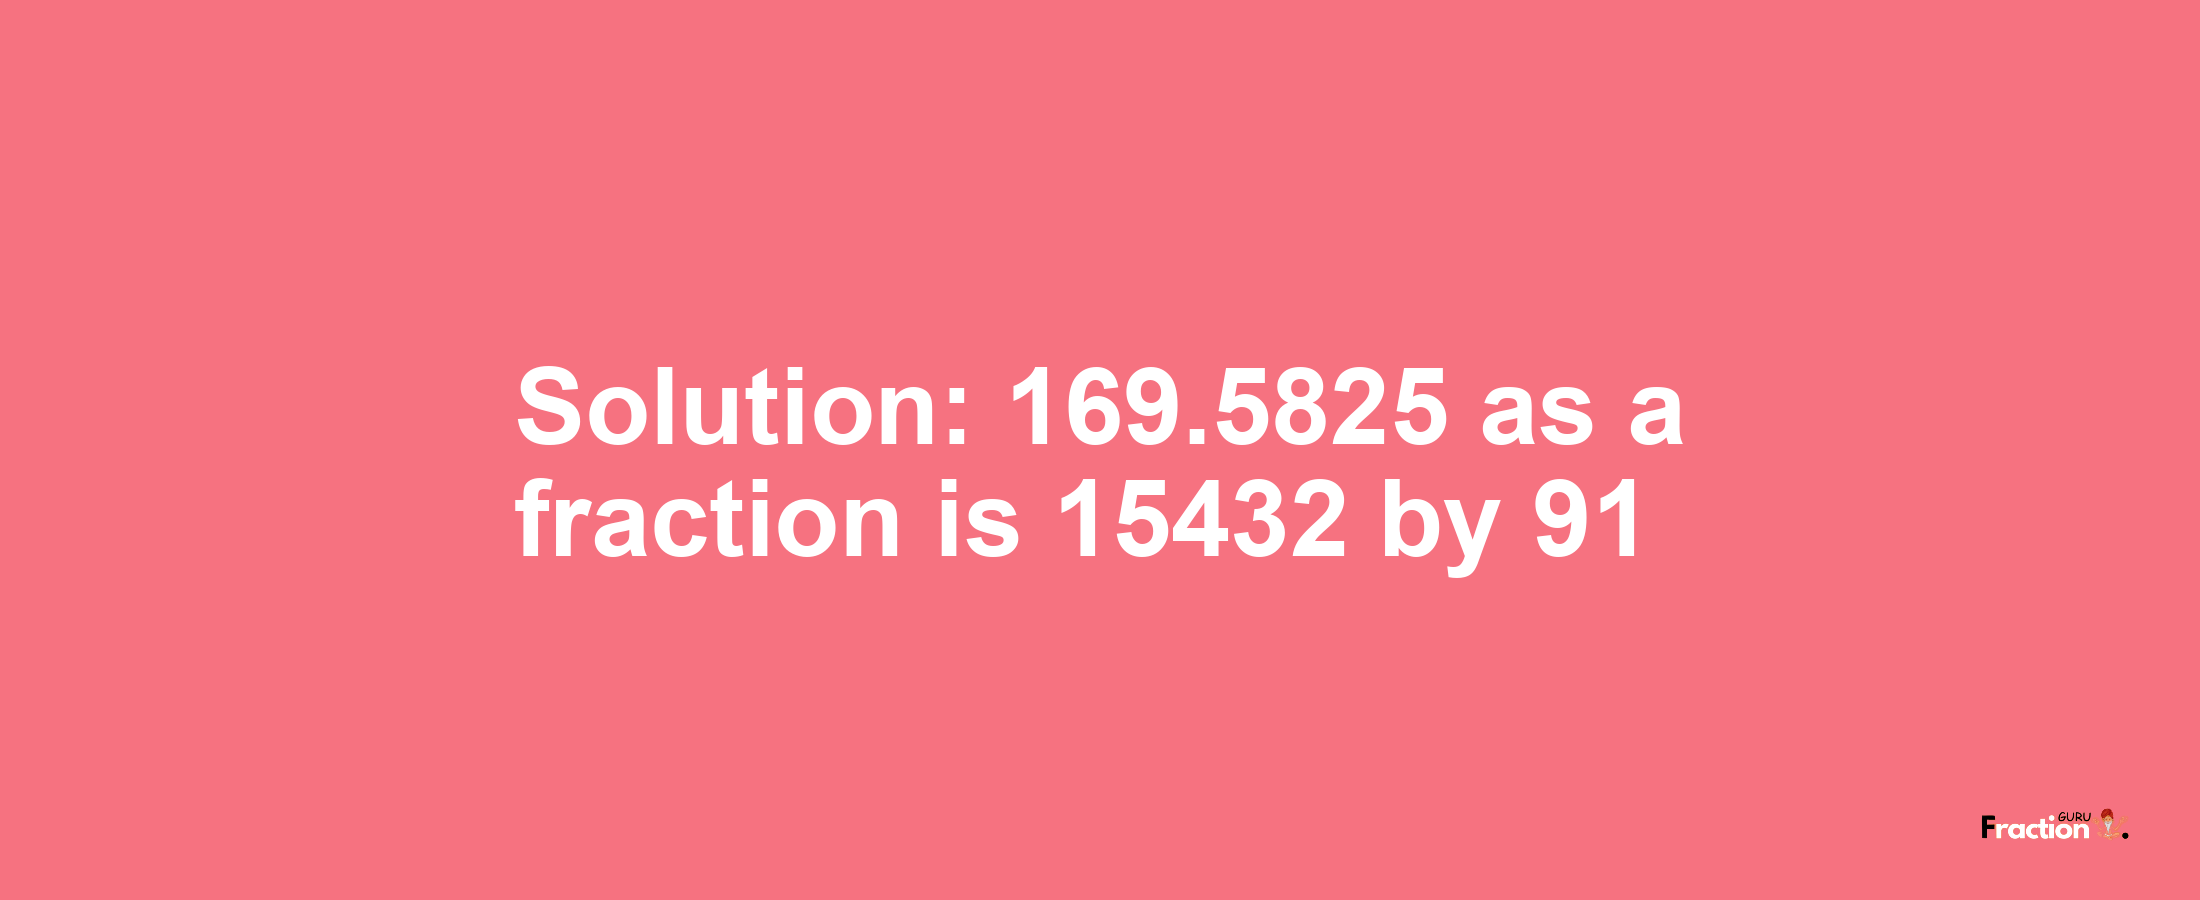 Solution:169.5825 as a fraction is 15432/91